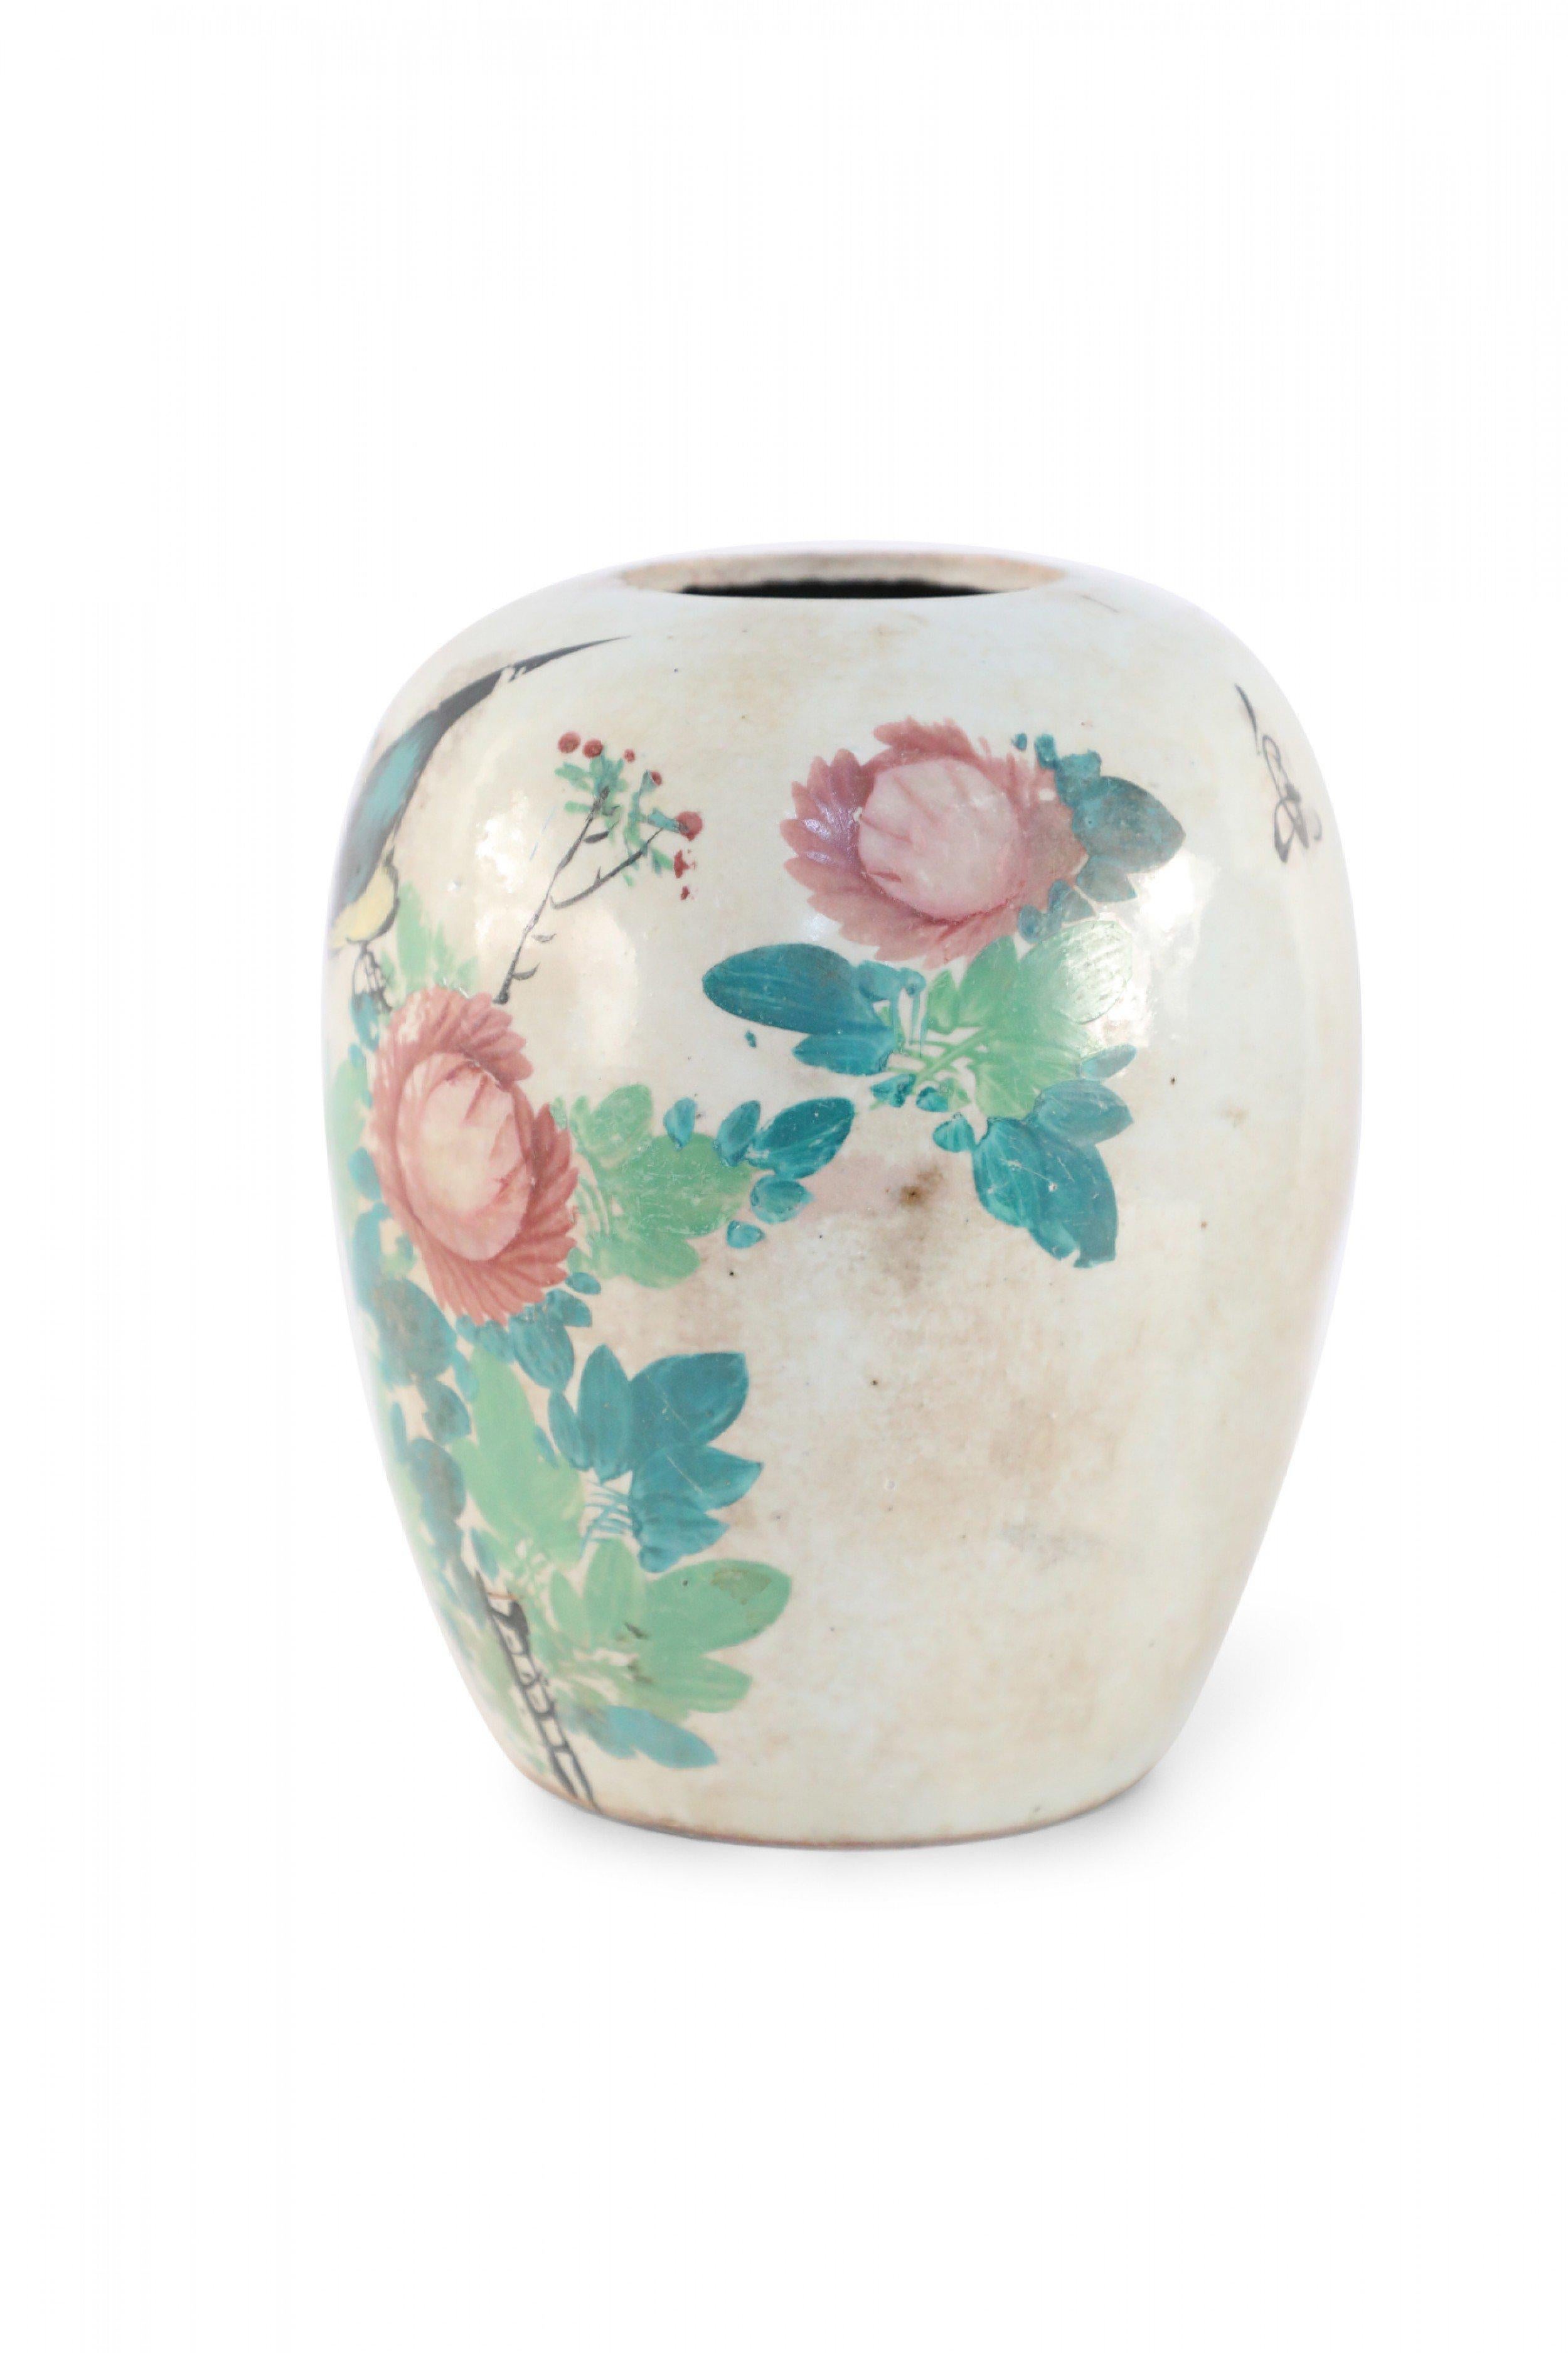 Antique Chinese (Early 20th Century) bulbous porcelain vase with pink florals and a yellow-chested bird amid green leaves on one side and characters on the reverse. There is speckled crazing on the glaze.
 